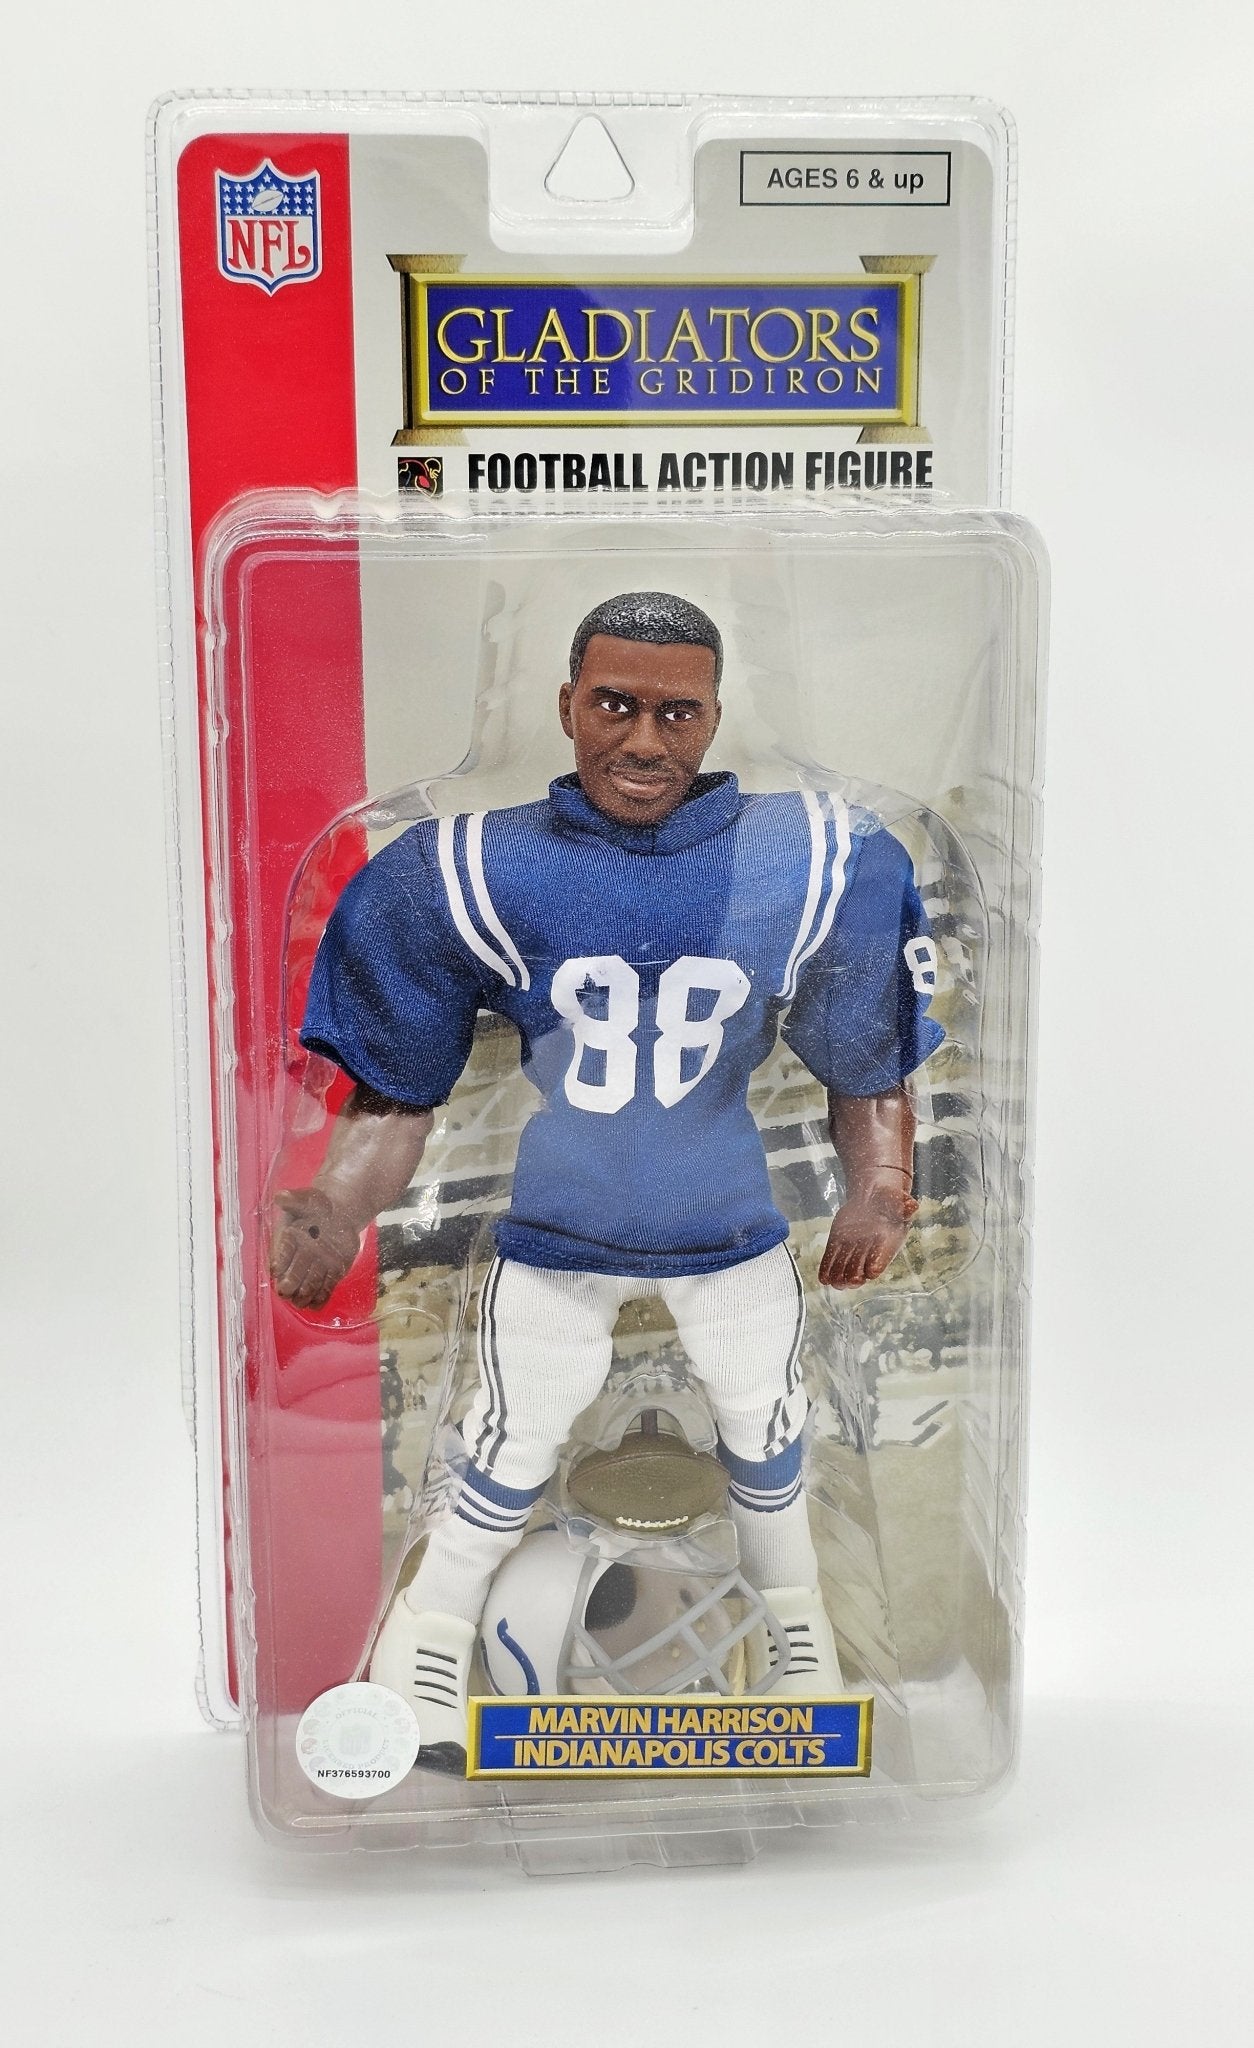 NFL - NFL | Gladiators Of The Gridiron | Marvin Harrison | 10" Football Action Figure - Action Figures - Steady Bunny Shop